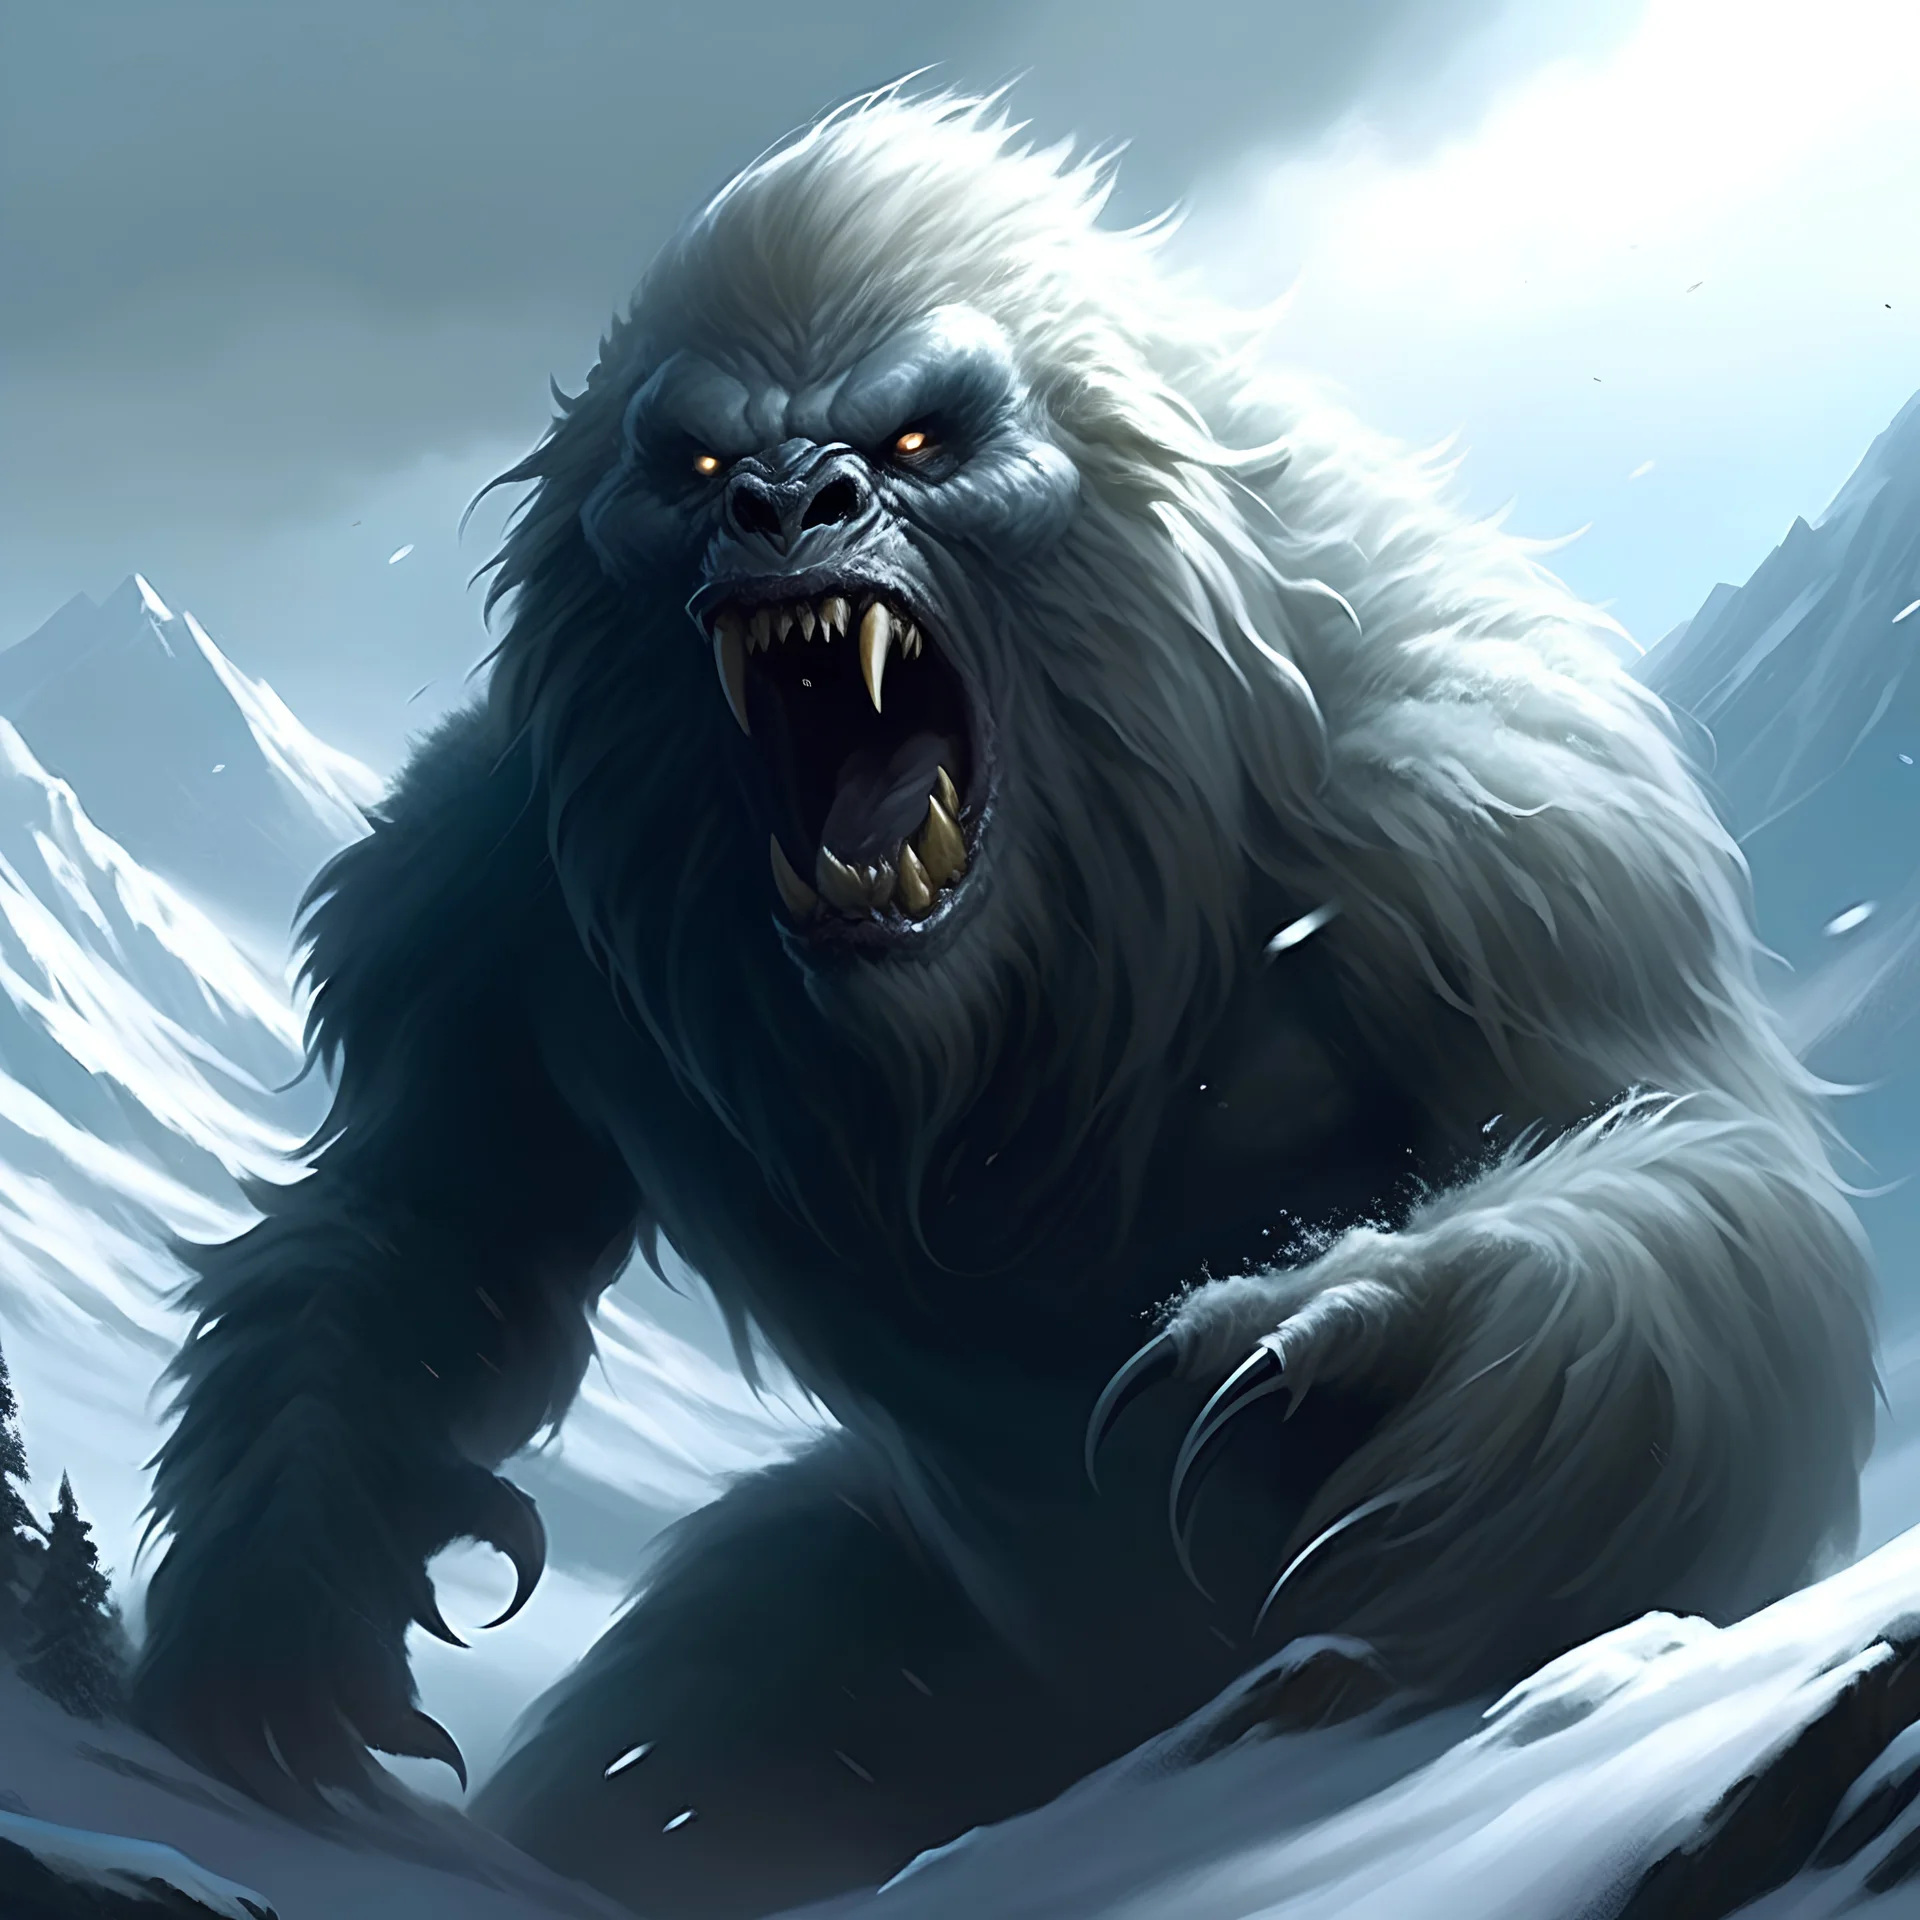 Trading card game style, large scary yeti roaring on a snowy mountain , high detail, photo, dark fantasy, illustration